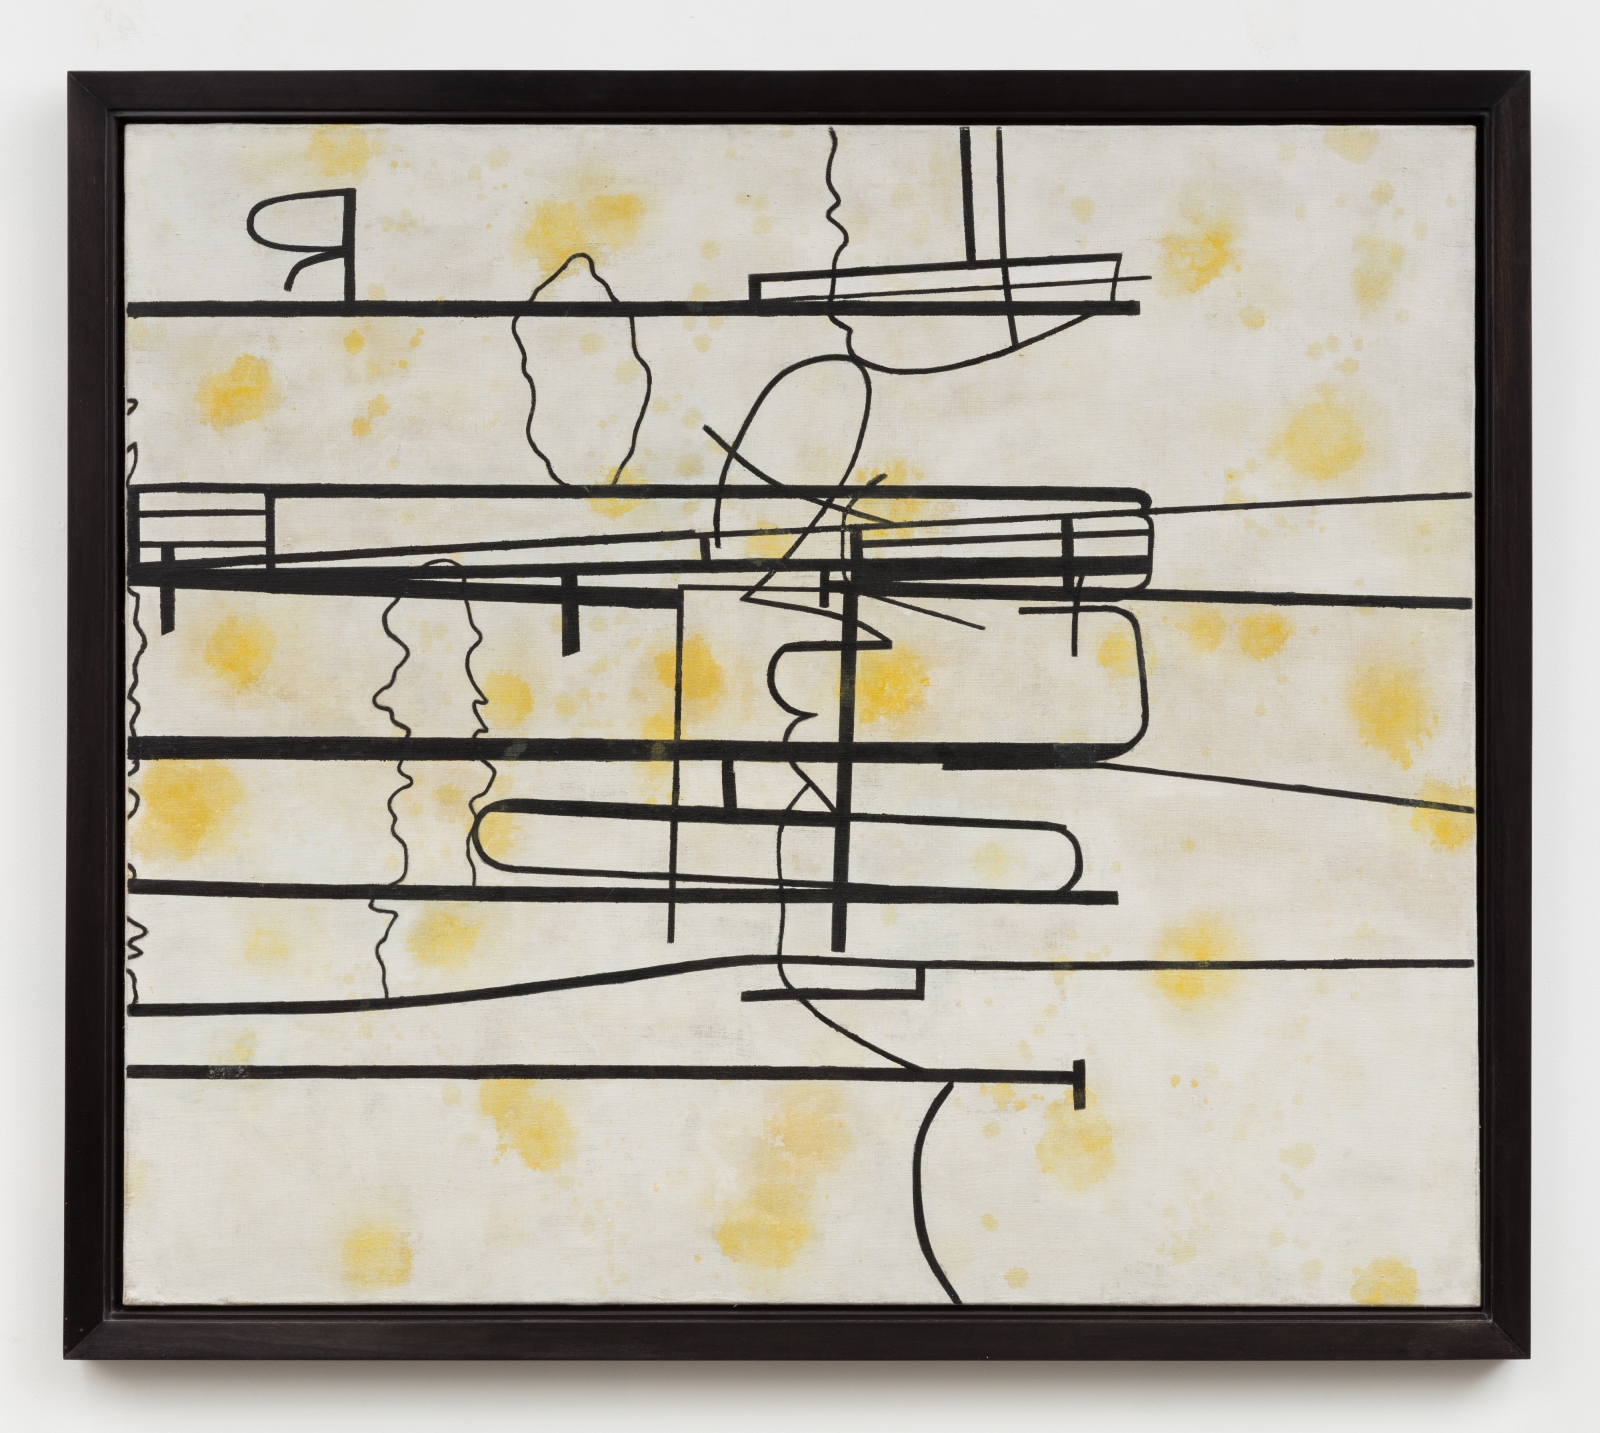 Prunella Clough
Wire and Rods, 1979
oil on canvas
40 3/8 x 46 1/4 ins.
102.5 x 117.5 cm